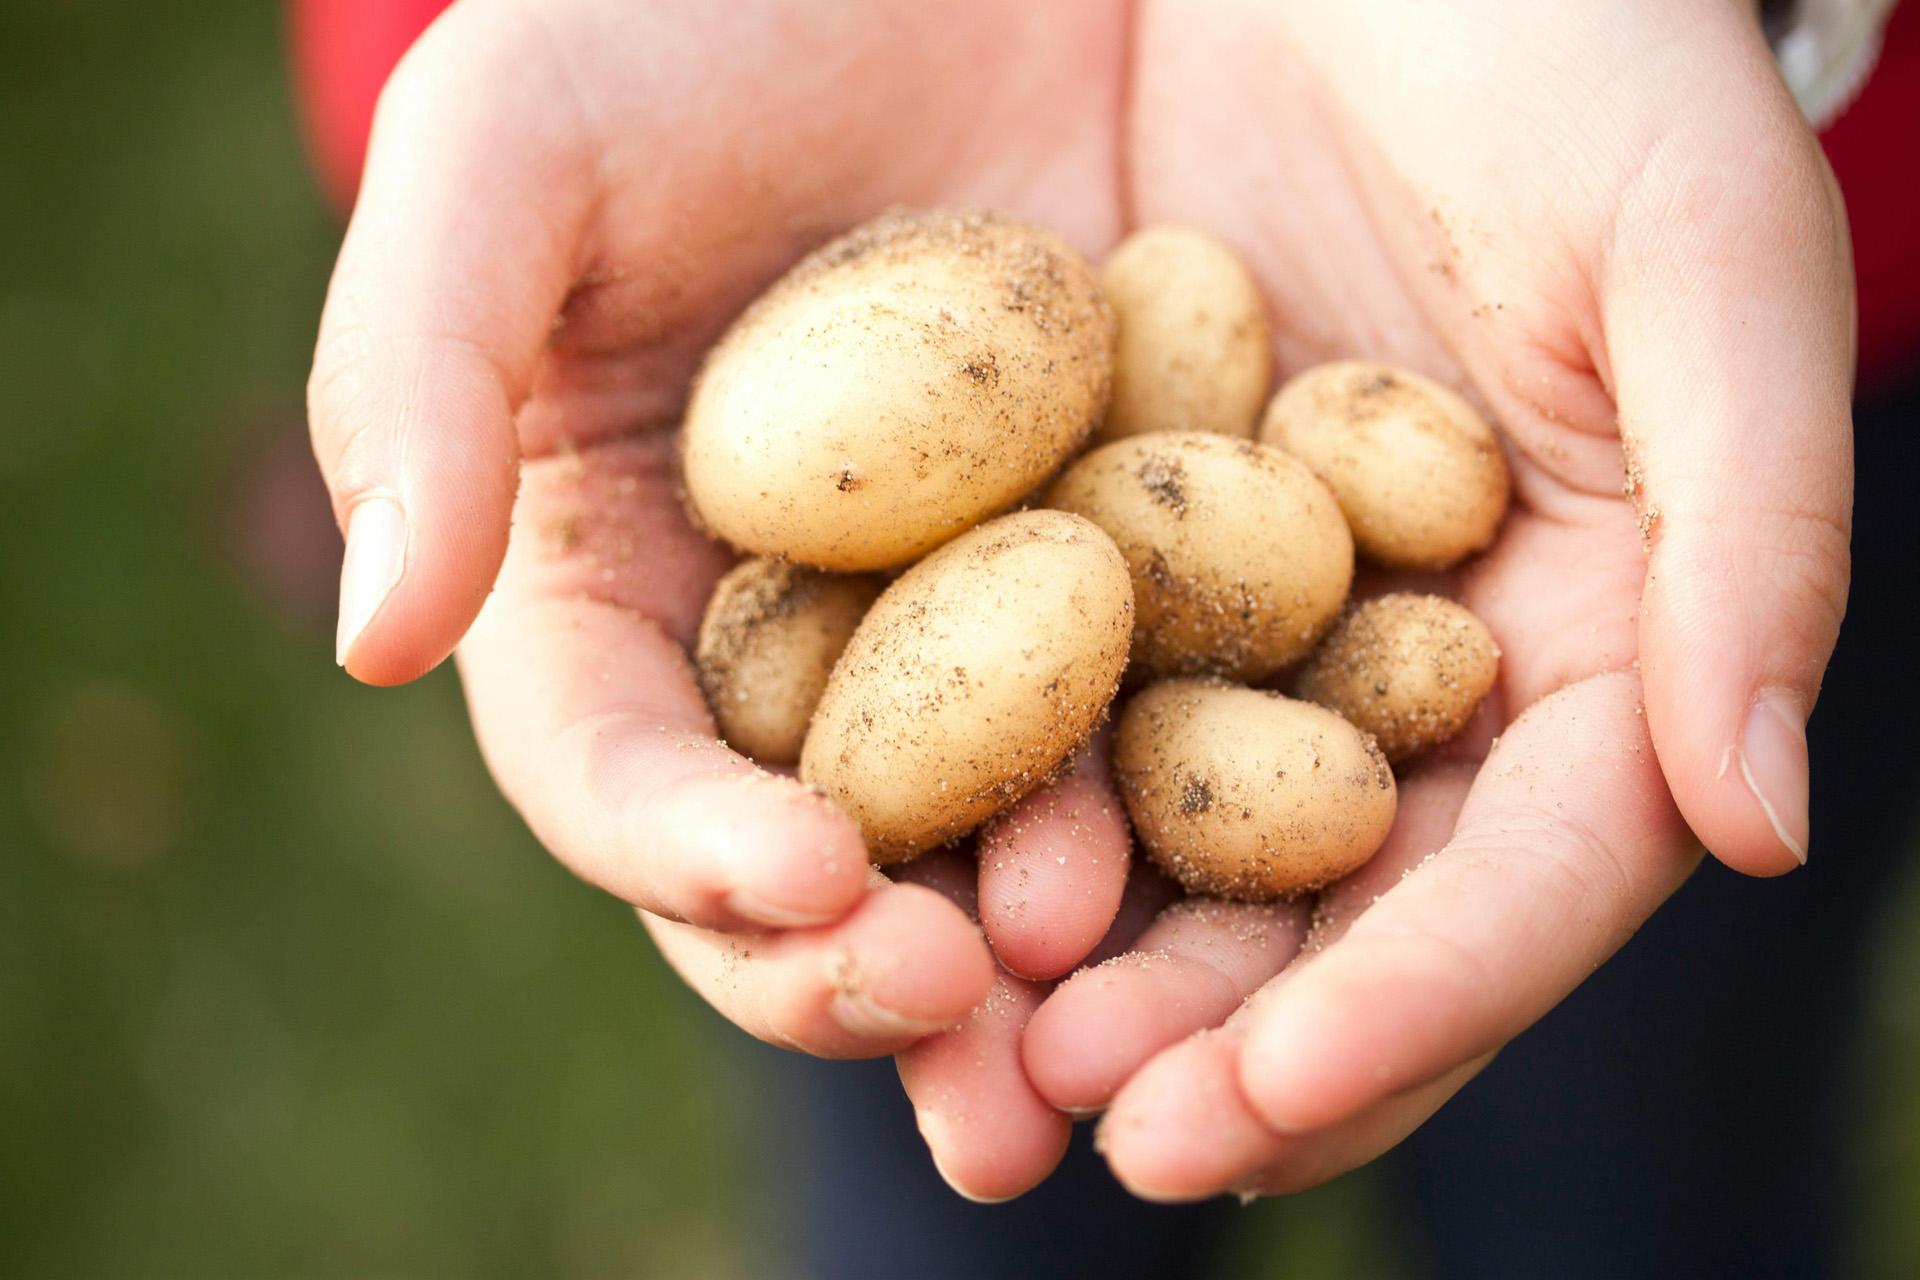 A hand holding newly harvested potatoes